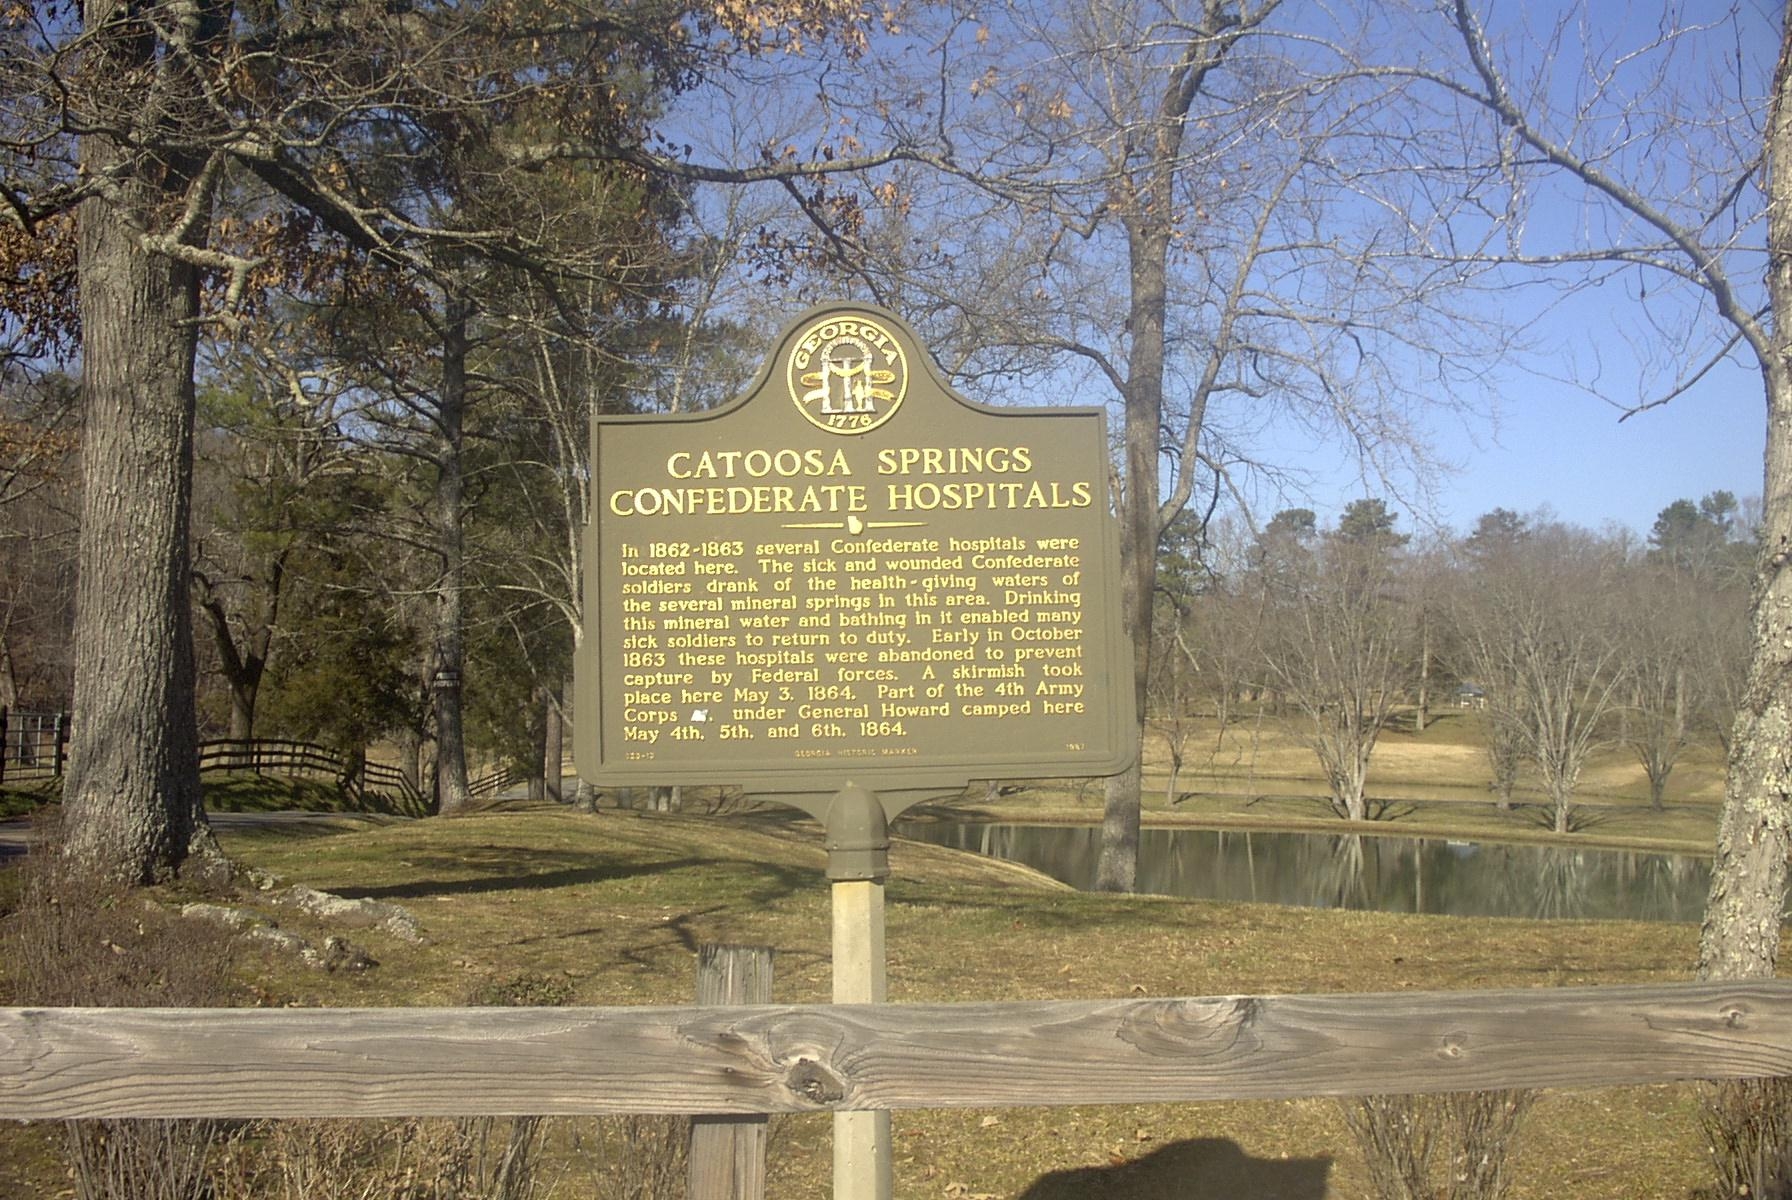 Catoosa Springs Confederate Hospitals Marker and Springs